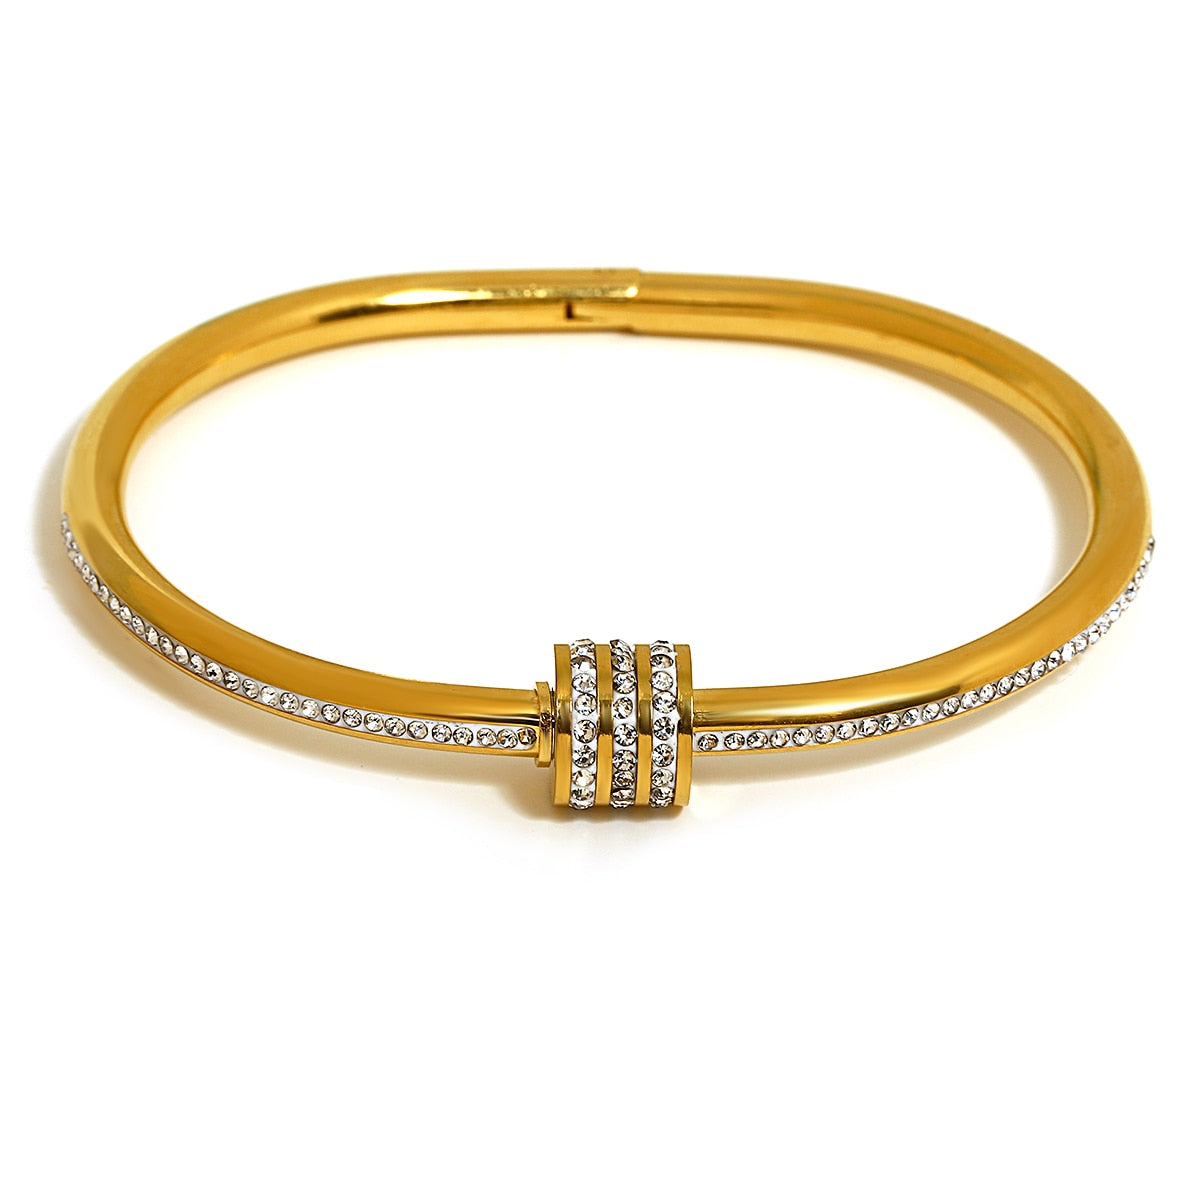 Chic Geometric Gold-Plated Stainless Steel Bangles